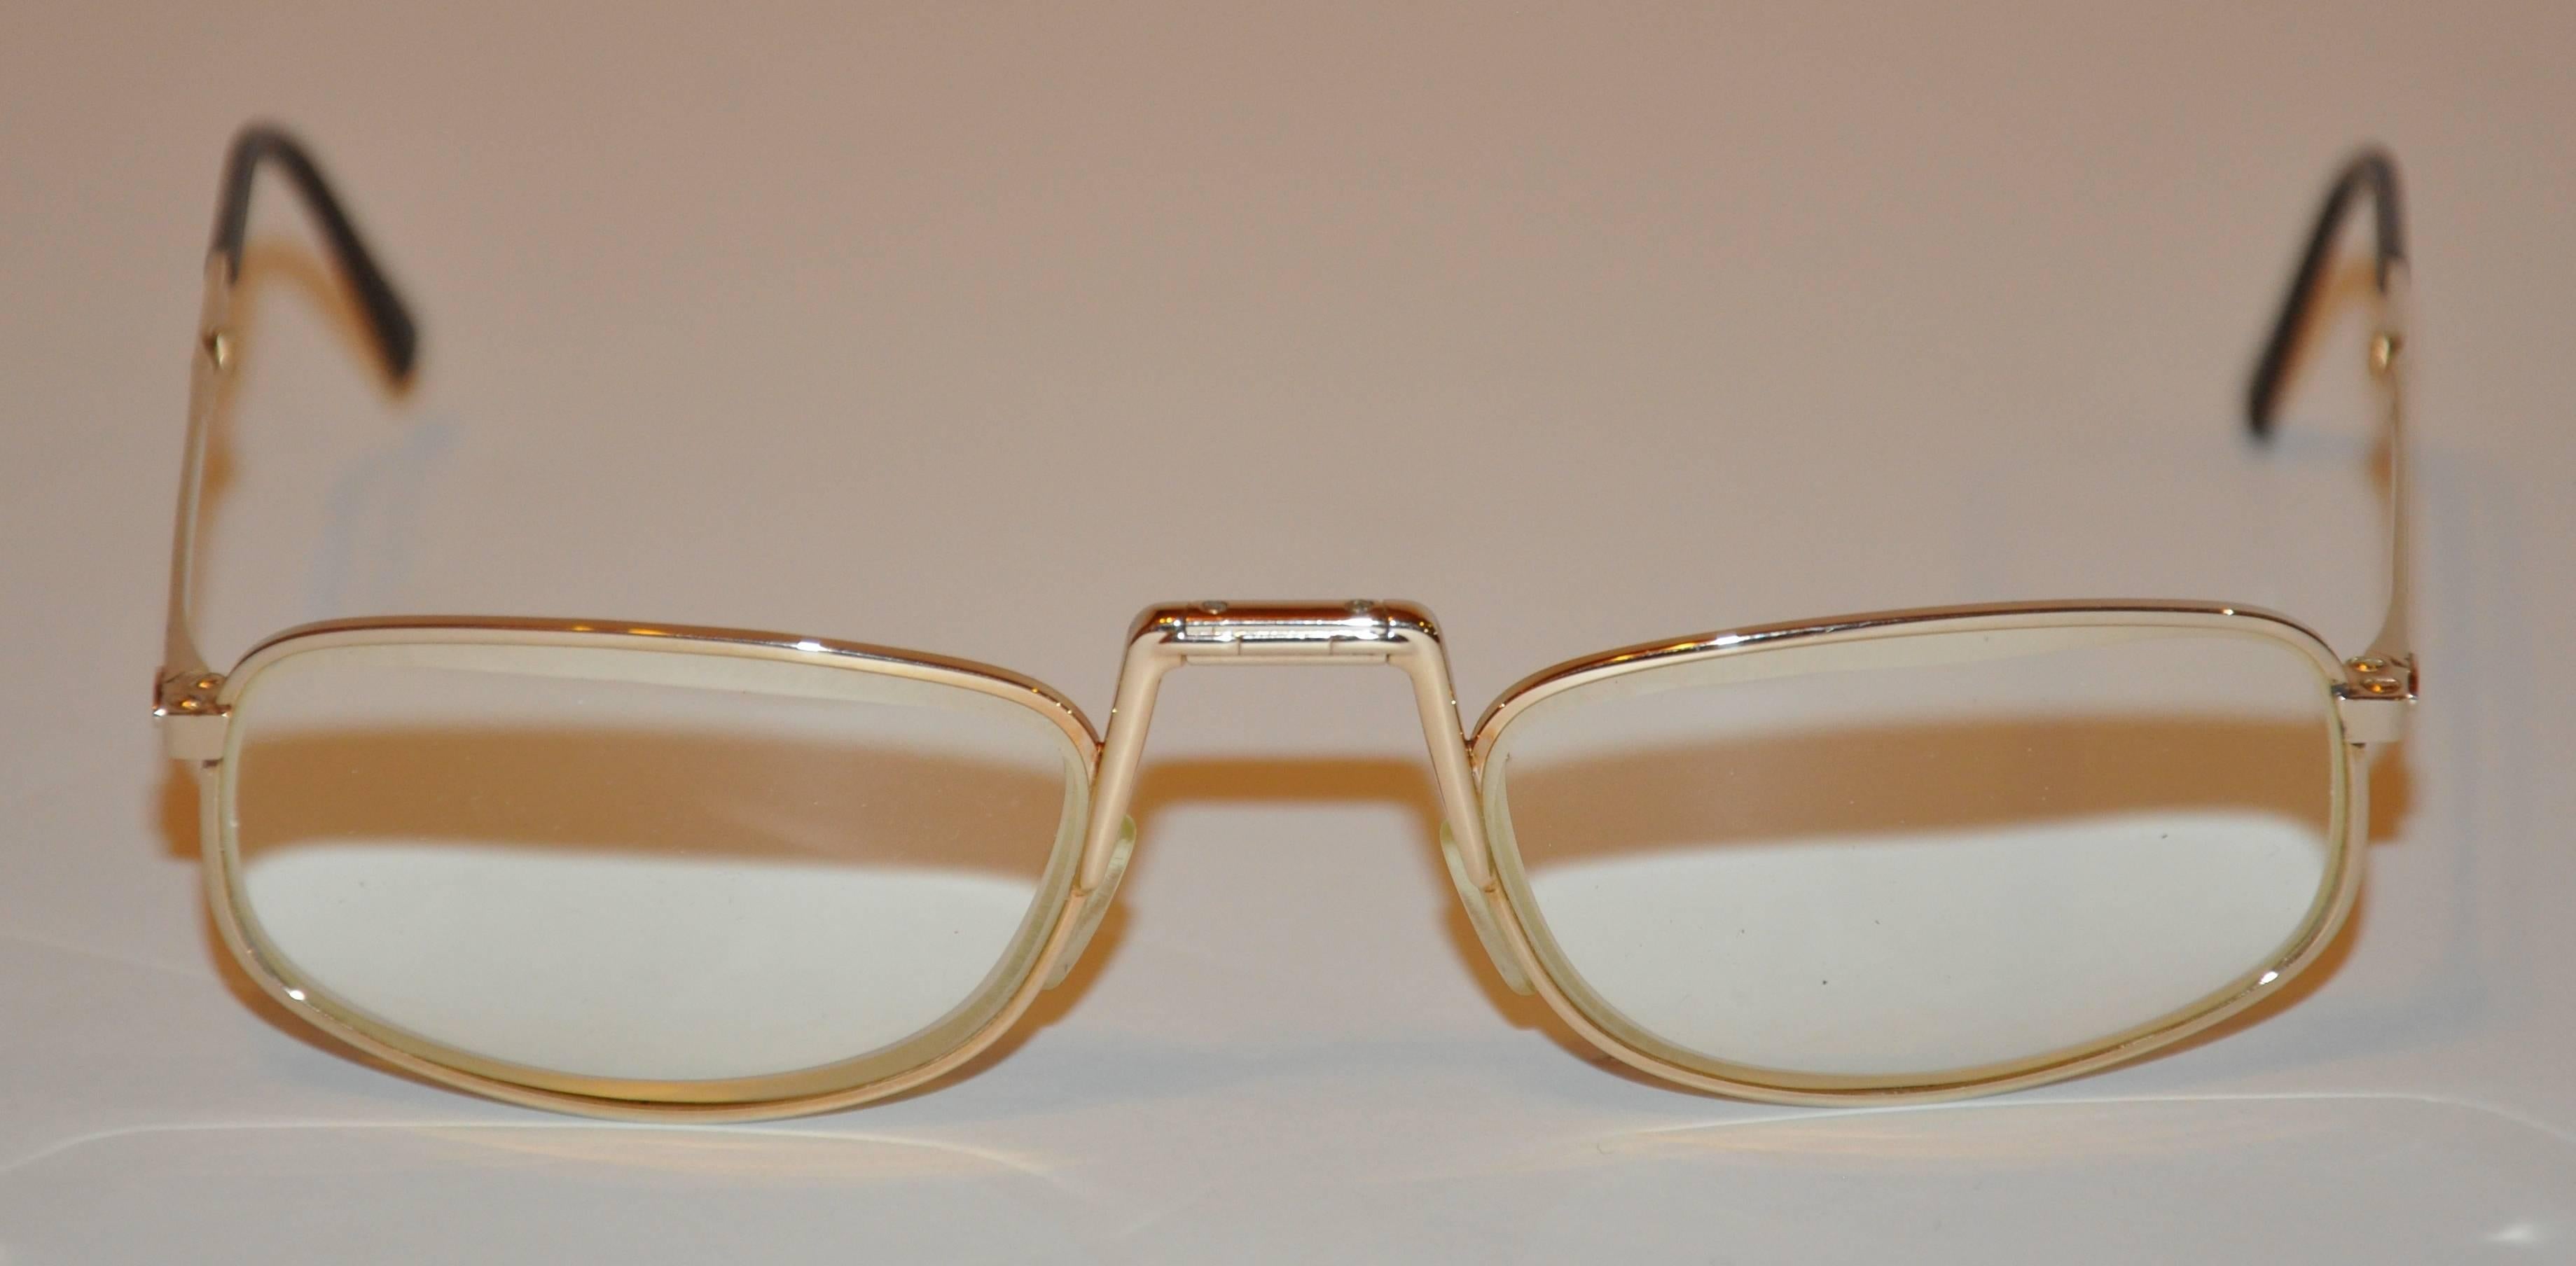        Christian Dior timeless foldable gold hardware frame eyeglasses folds into 2 1/2" x 1 1/2" x 1". When opened to full size, the width measures 5 1/8" across the front, height is 1 1/4", arms are 5 1/4" in length,